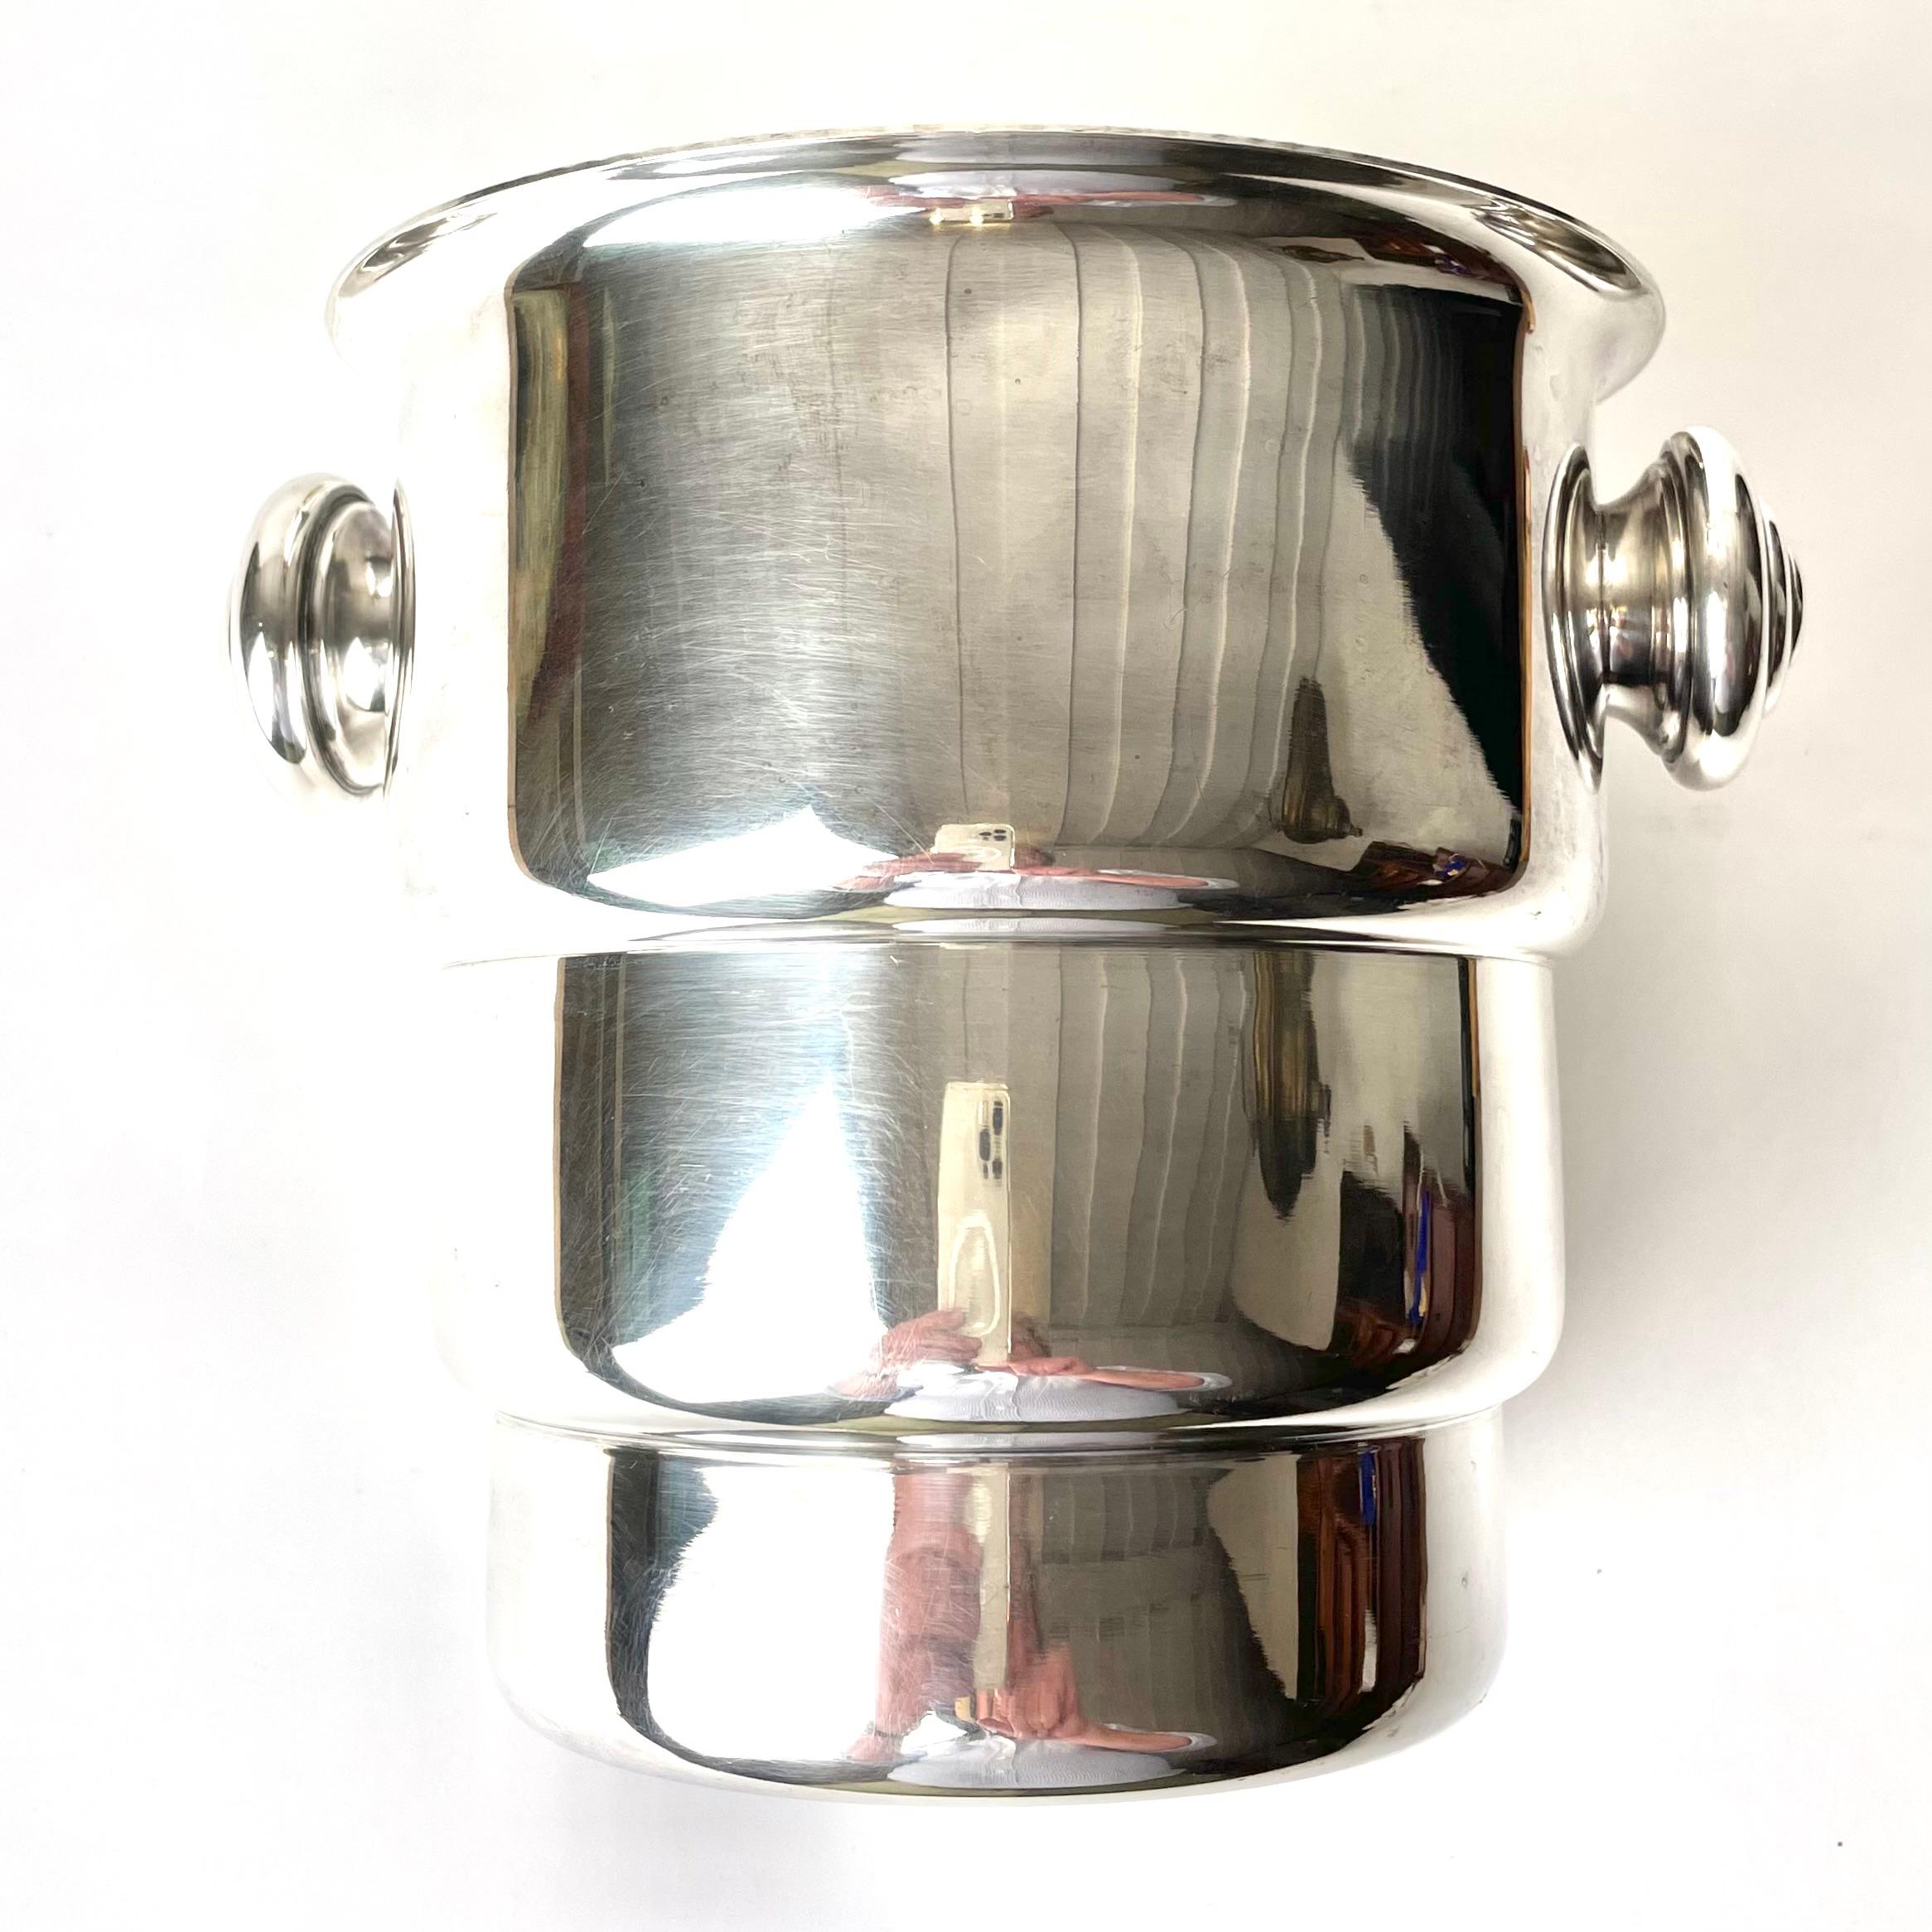 Elegant Art Deco Champagne Cooler, silver plated. Made in France during the 1920s or 1930s.

A refined champagne cooler. Reflecting Art Deco sensibilities, this piece combines elegance in form and refinement in material choice. The piece's